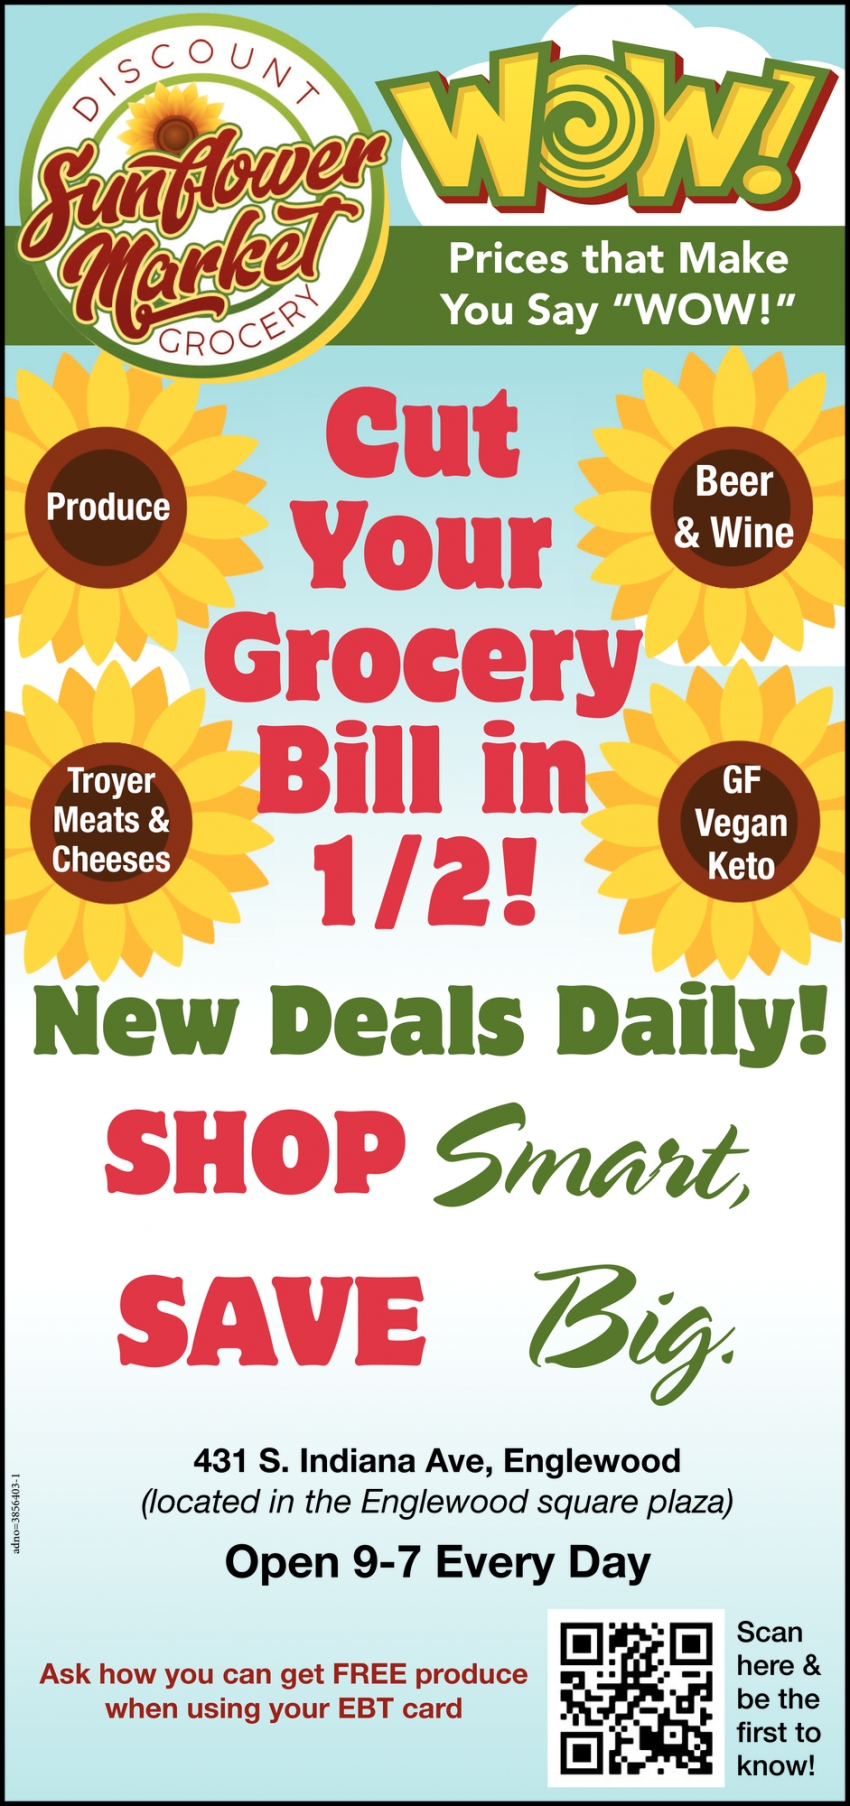 Get Your Grocery Bill In 1/2